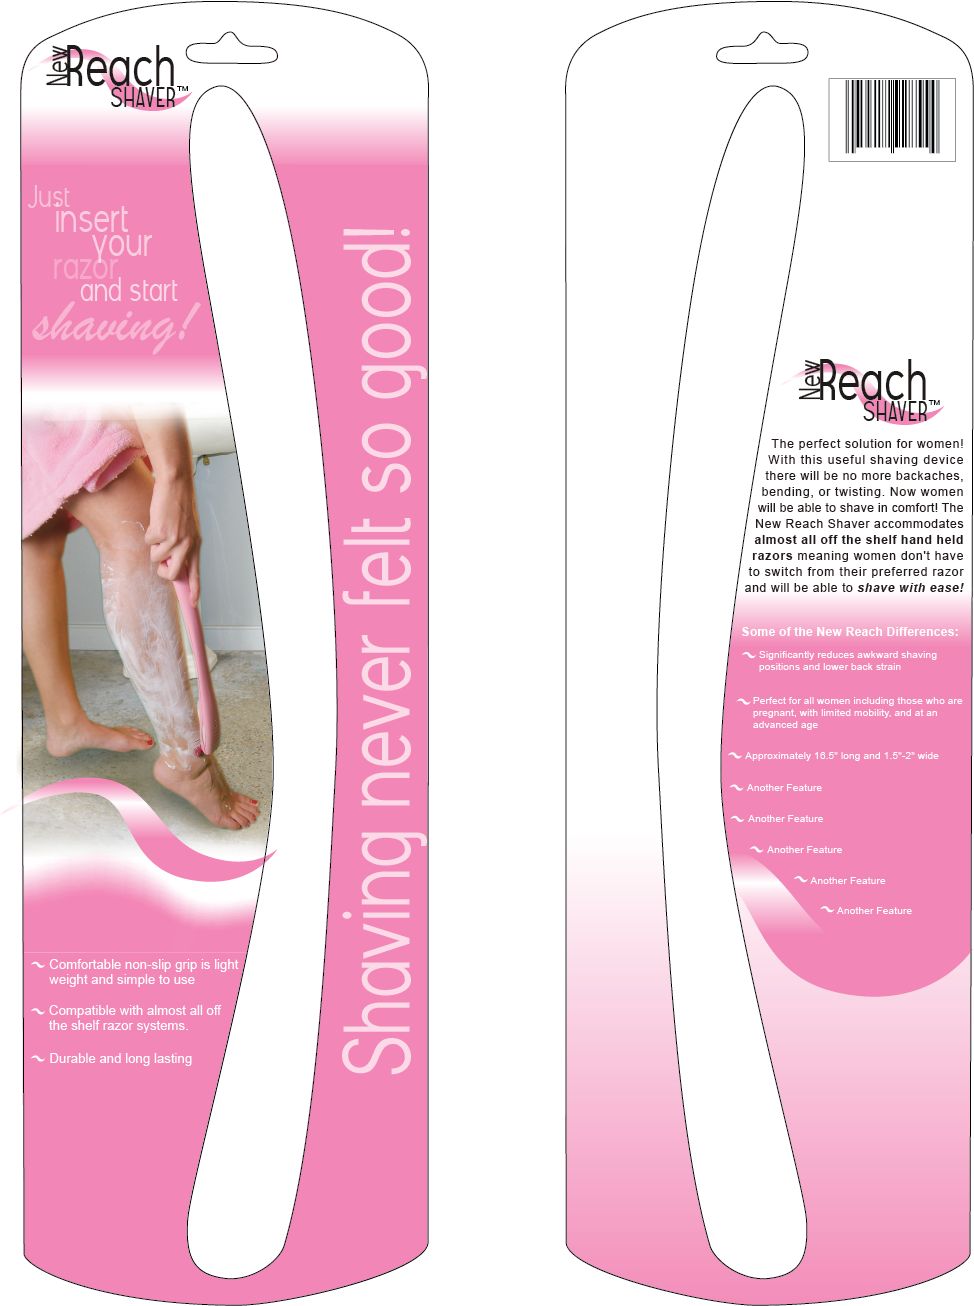 New Reach shaver packaging design